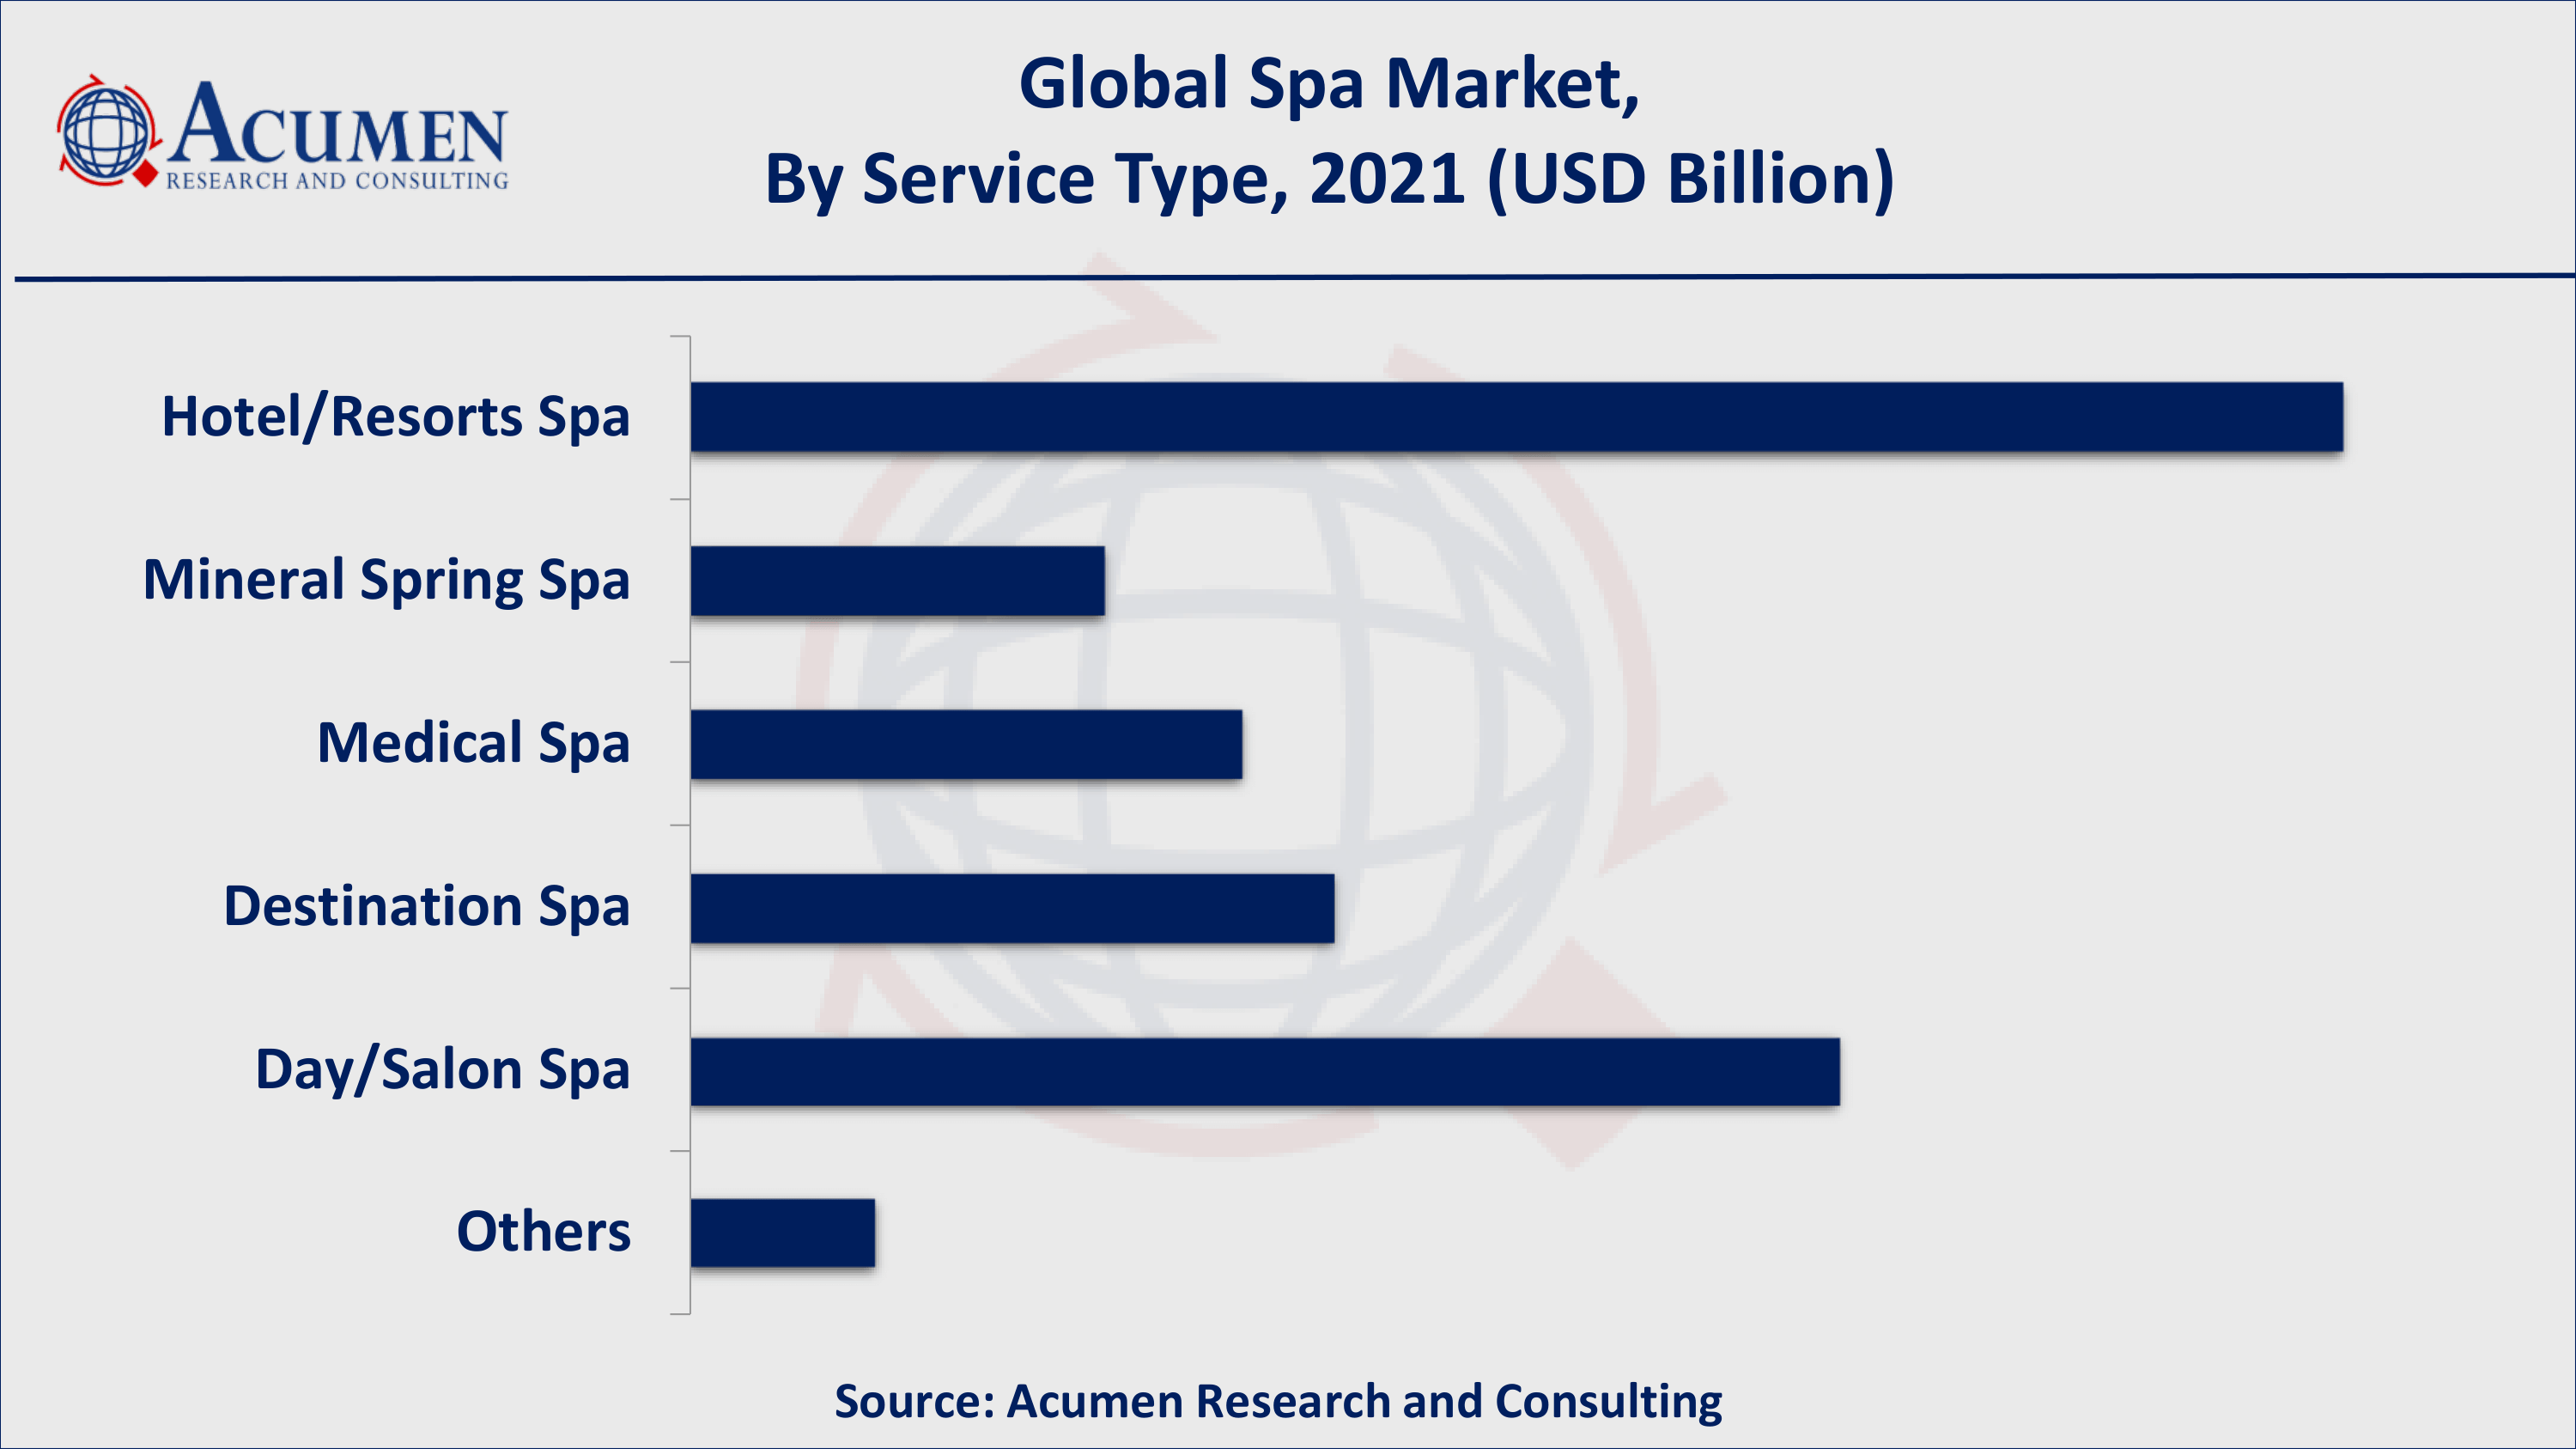 Based on service type, resort spa acquired over 36% of the overall market share in 2021